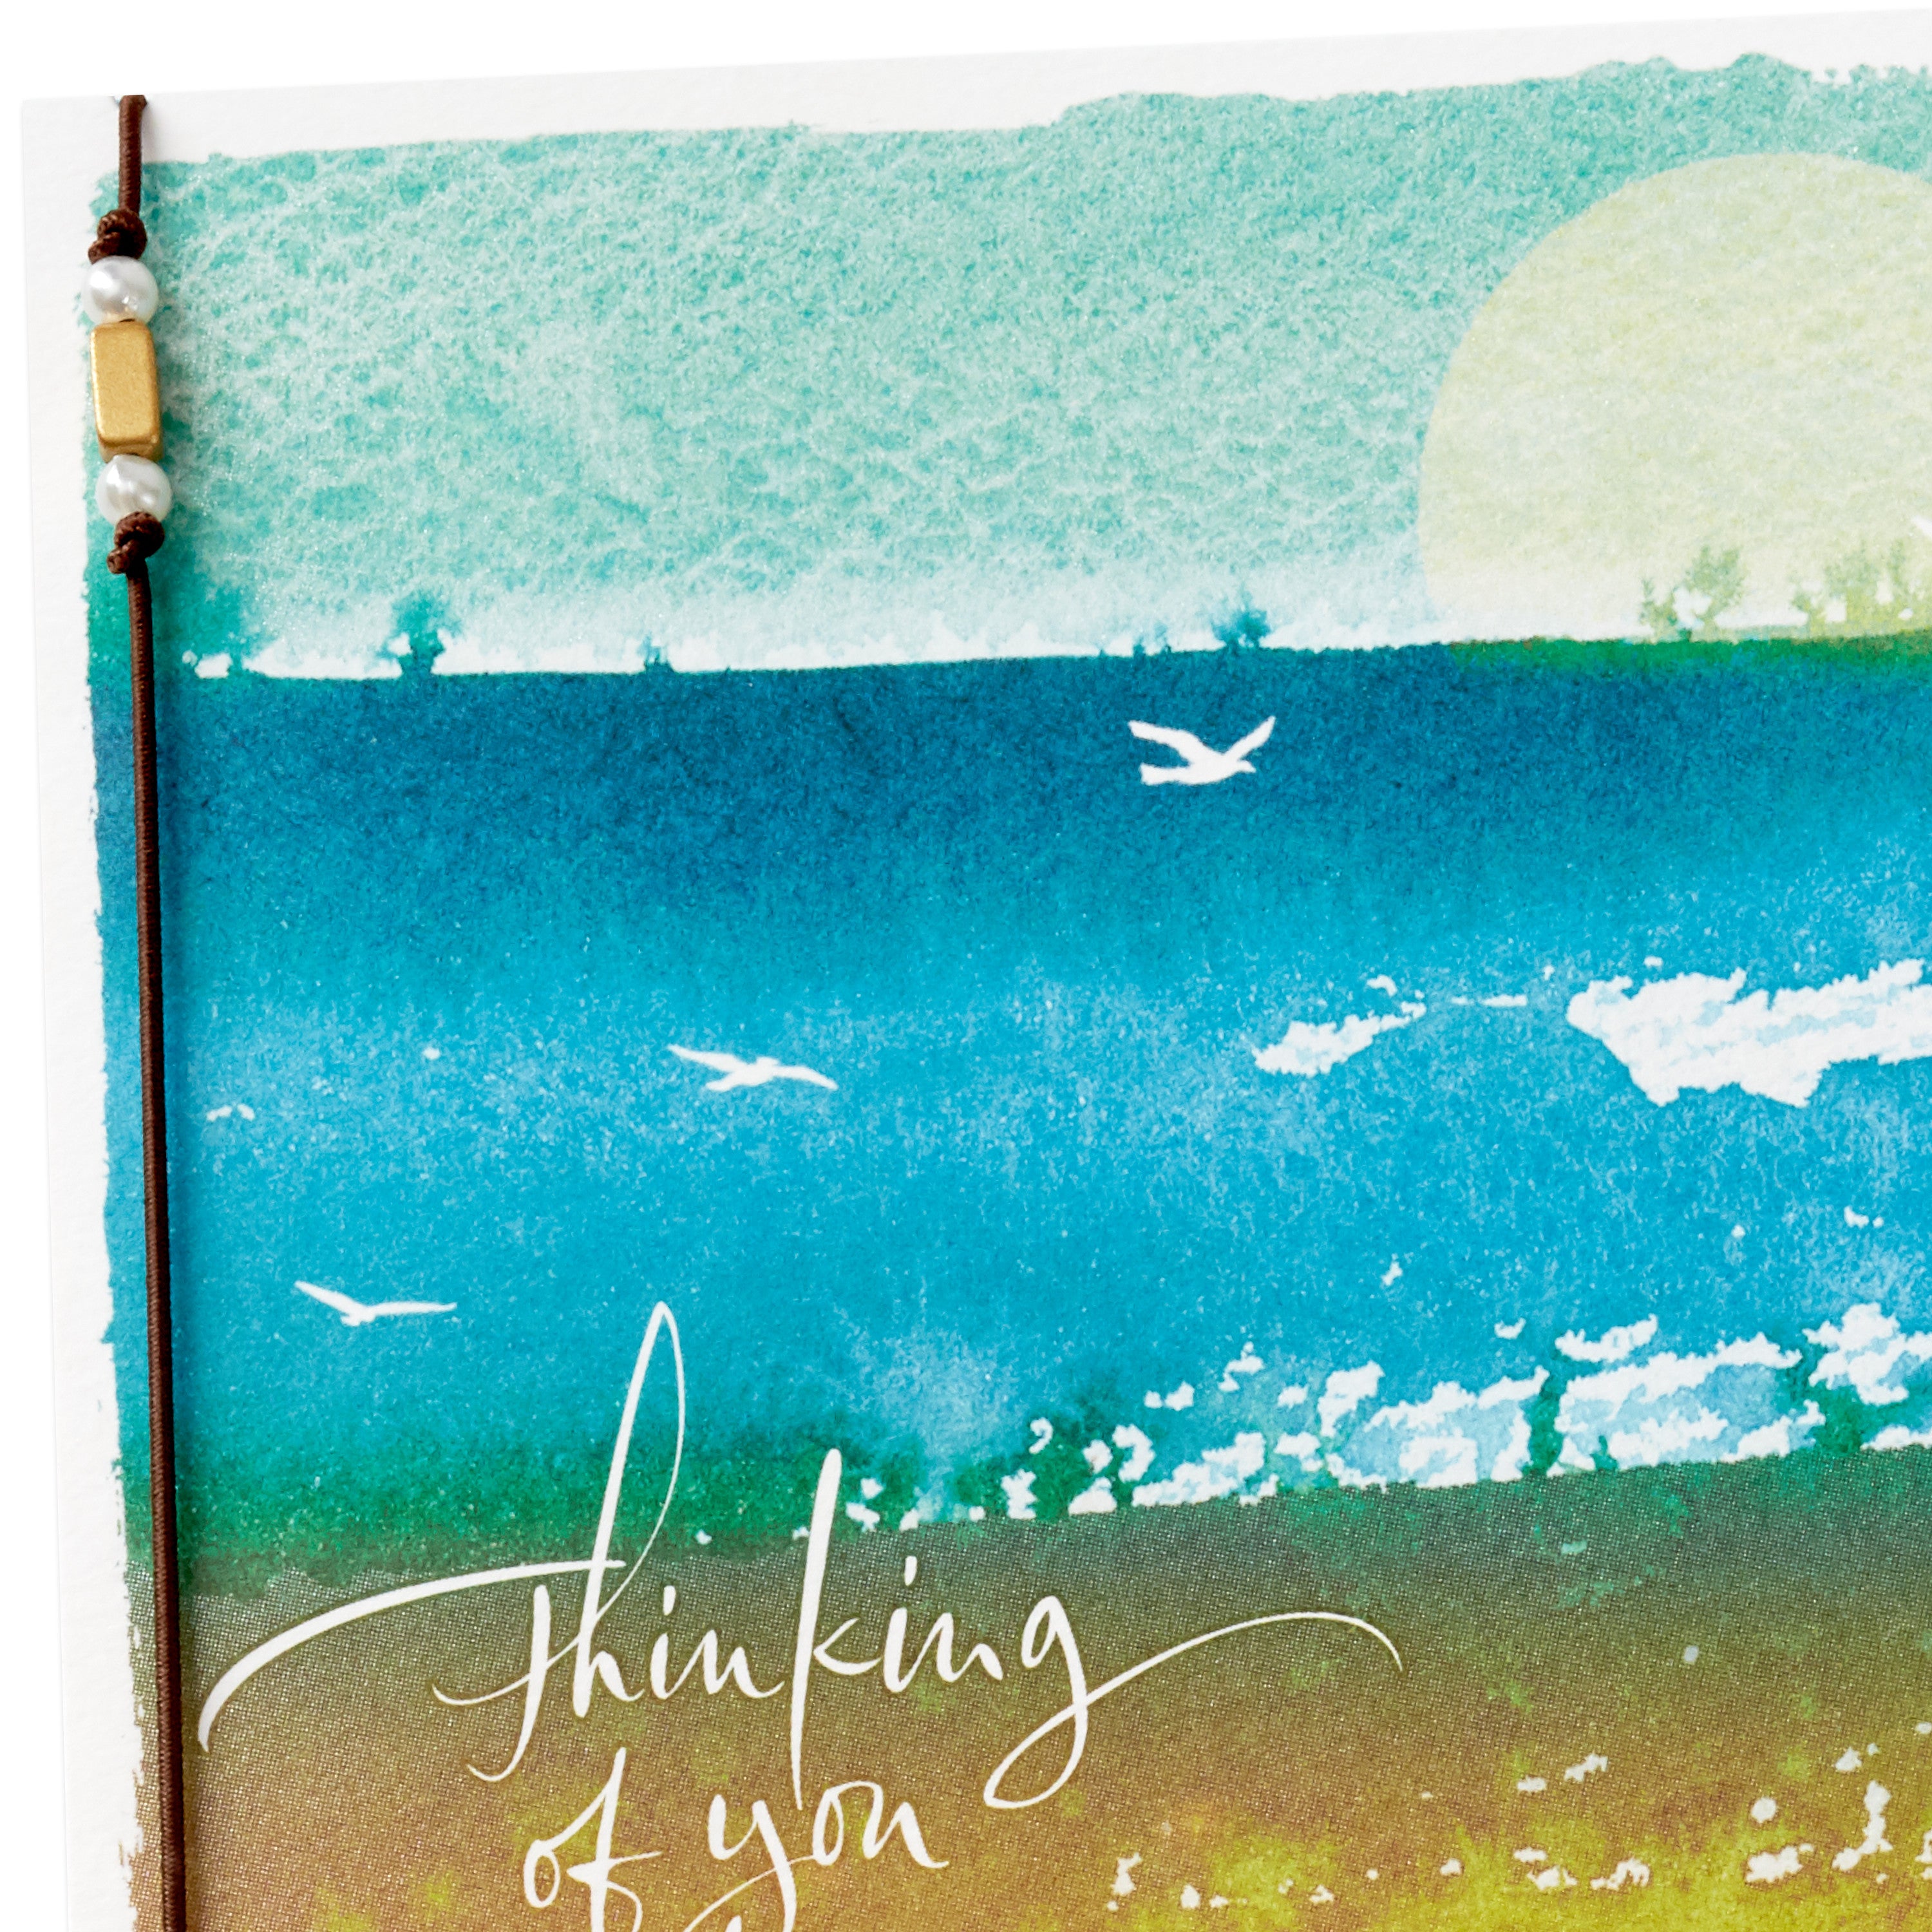  Pack of 2 Sympathy Cards (Seascape with Birds)